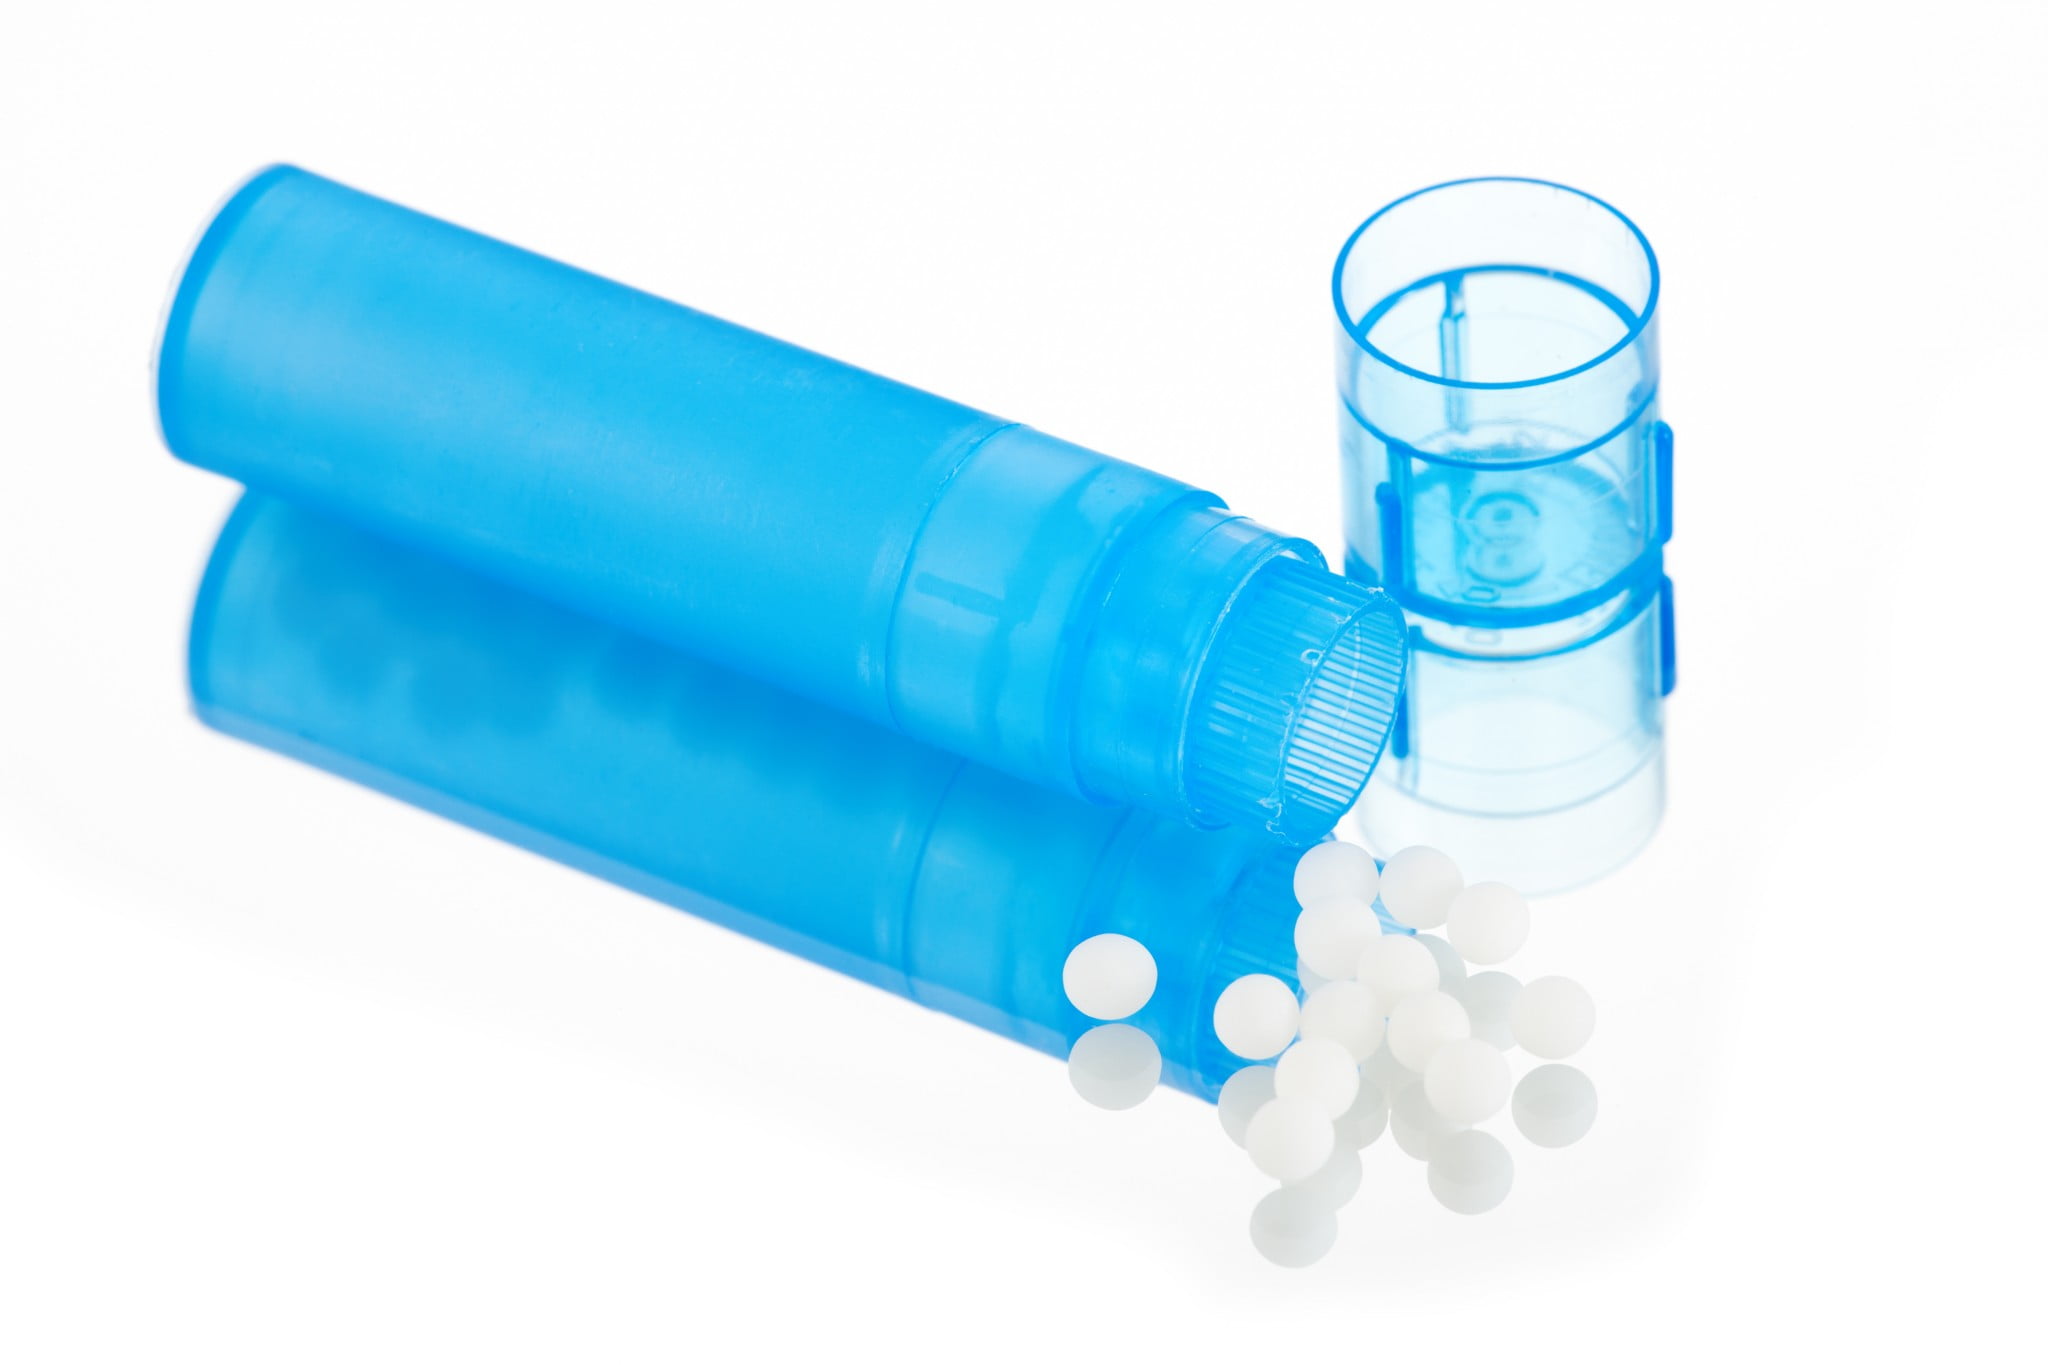 homoeopathy pills and blue bottle